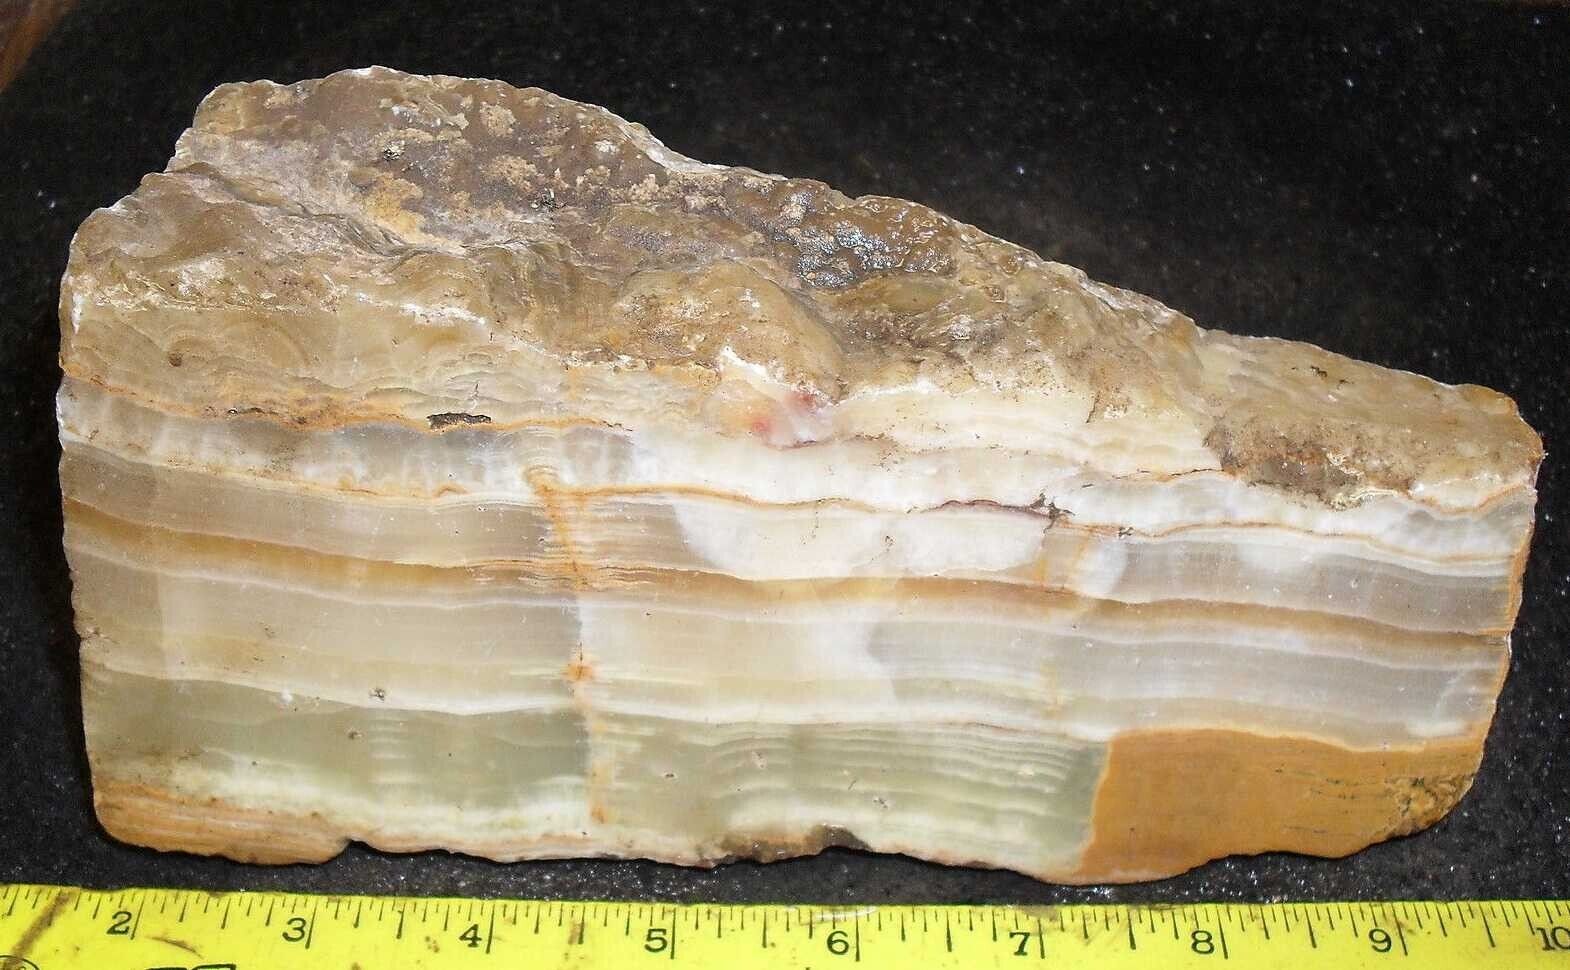 Superb CALCITE ONYX faced rough … 4.9 lbs … great slabber